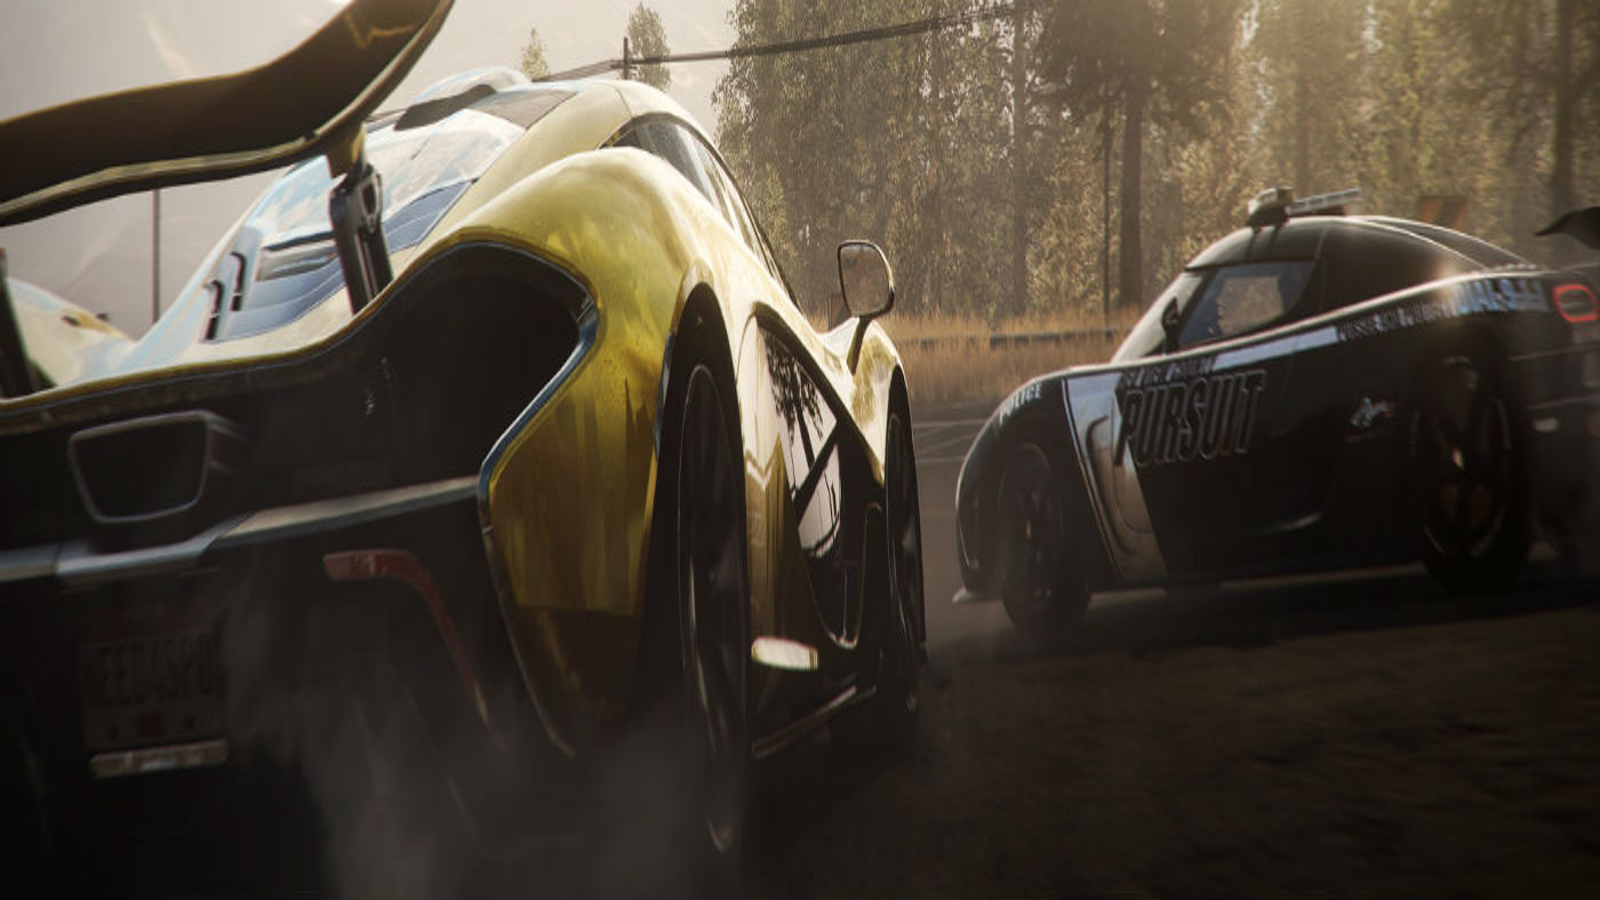 Need for Speed Rivals announced for Xbox One, PS4, and current-gen